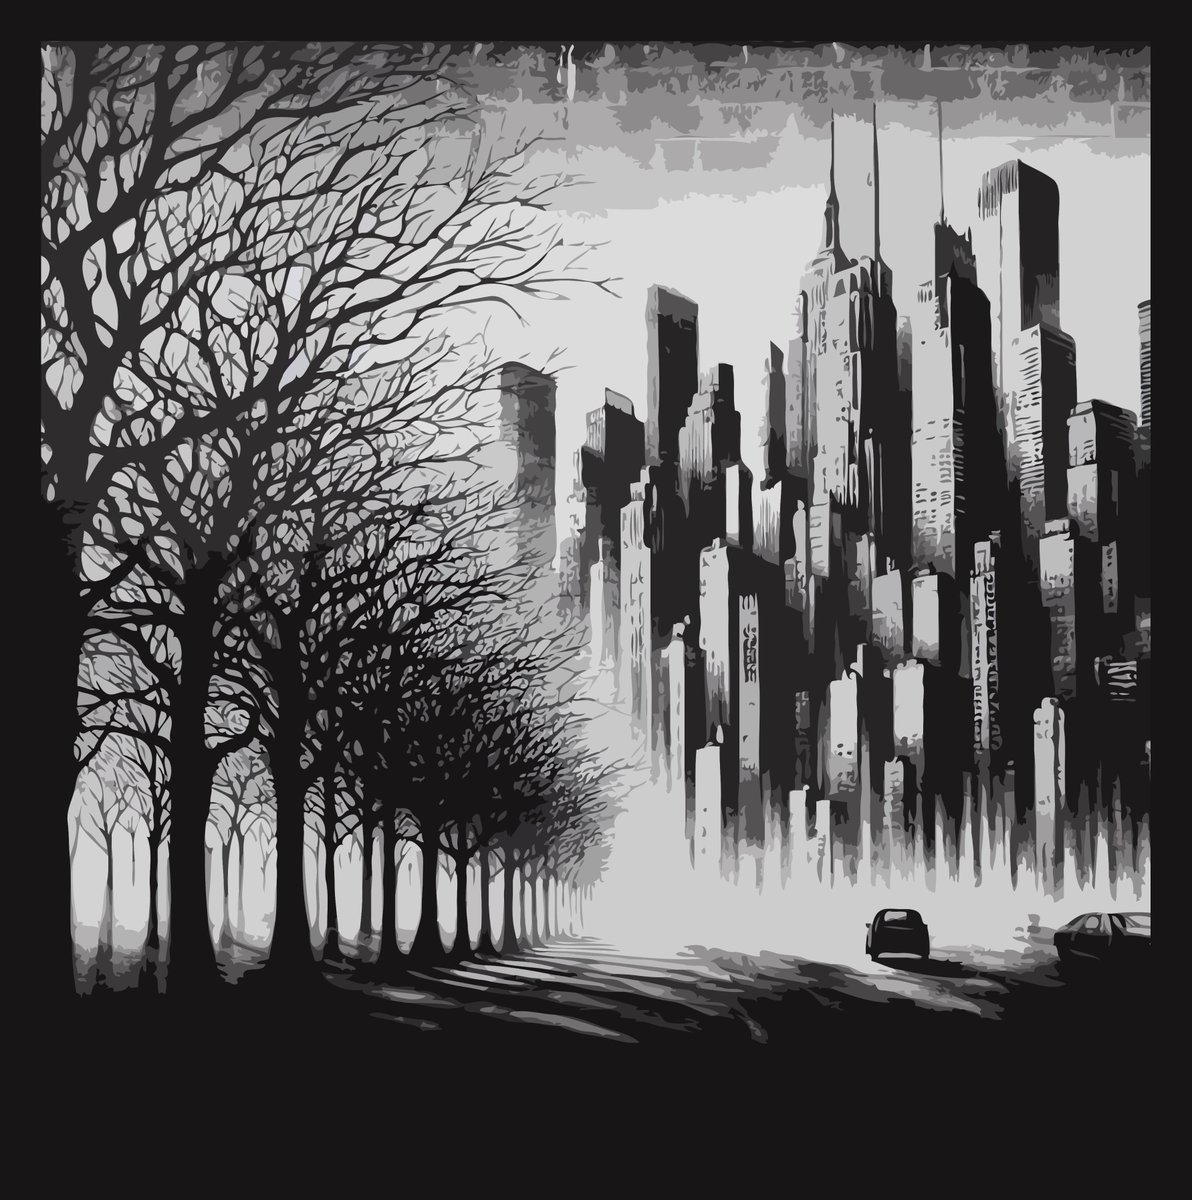 My new black and white city design for #redbubble.
Check out my other stuff and maybe you will find something nice for you.
redbubble.com/people/SonZza/…
#giftidea #art #sonzza